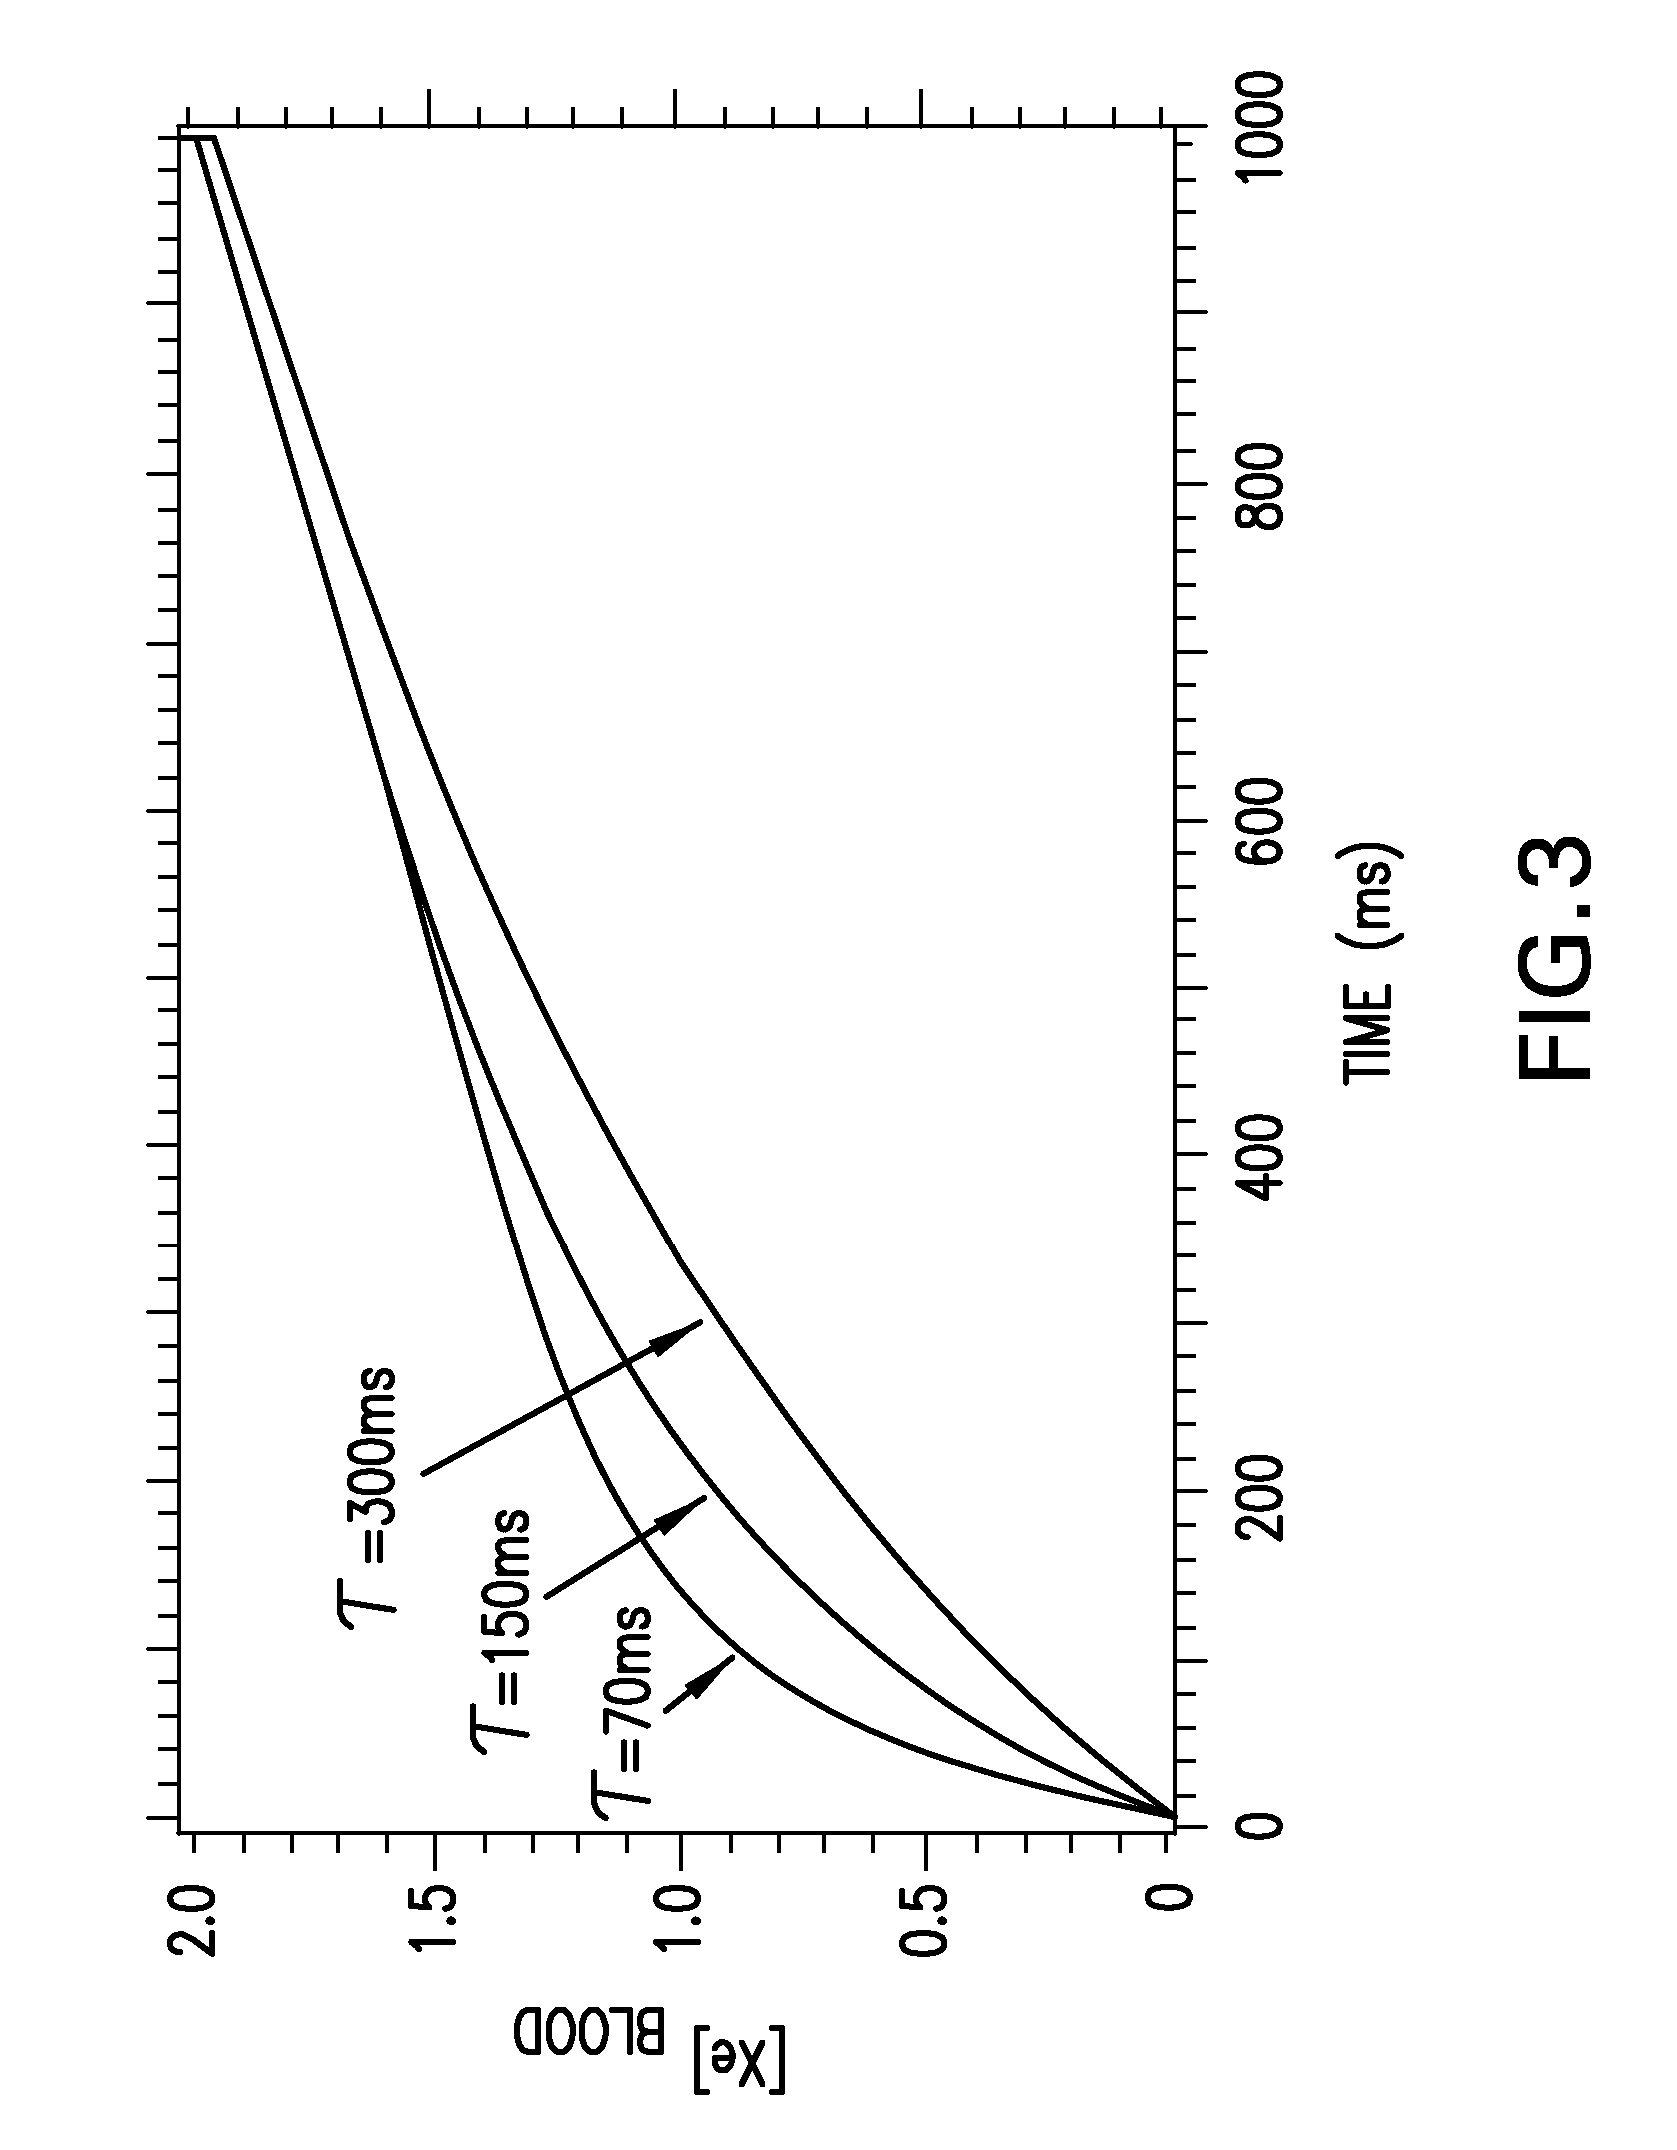 Methods for In Vivo Evaluation of Pulmonary Physiology And/Or Function Using NMR Signals of Polarized 129Xe